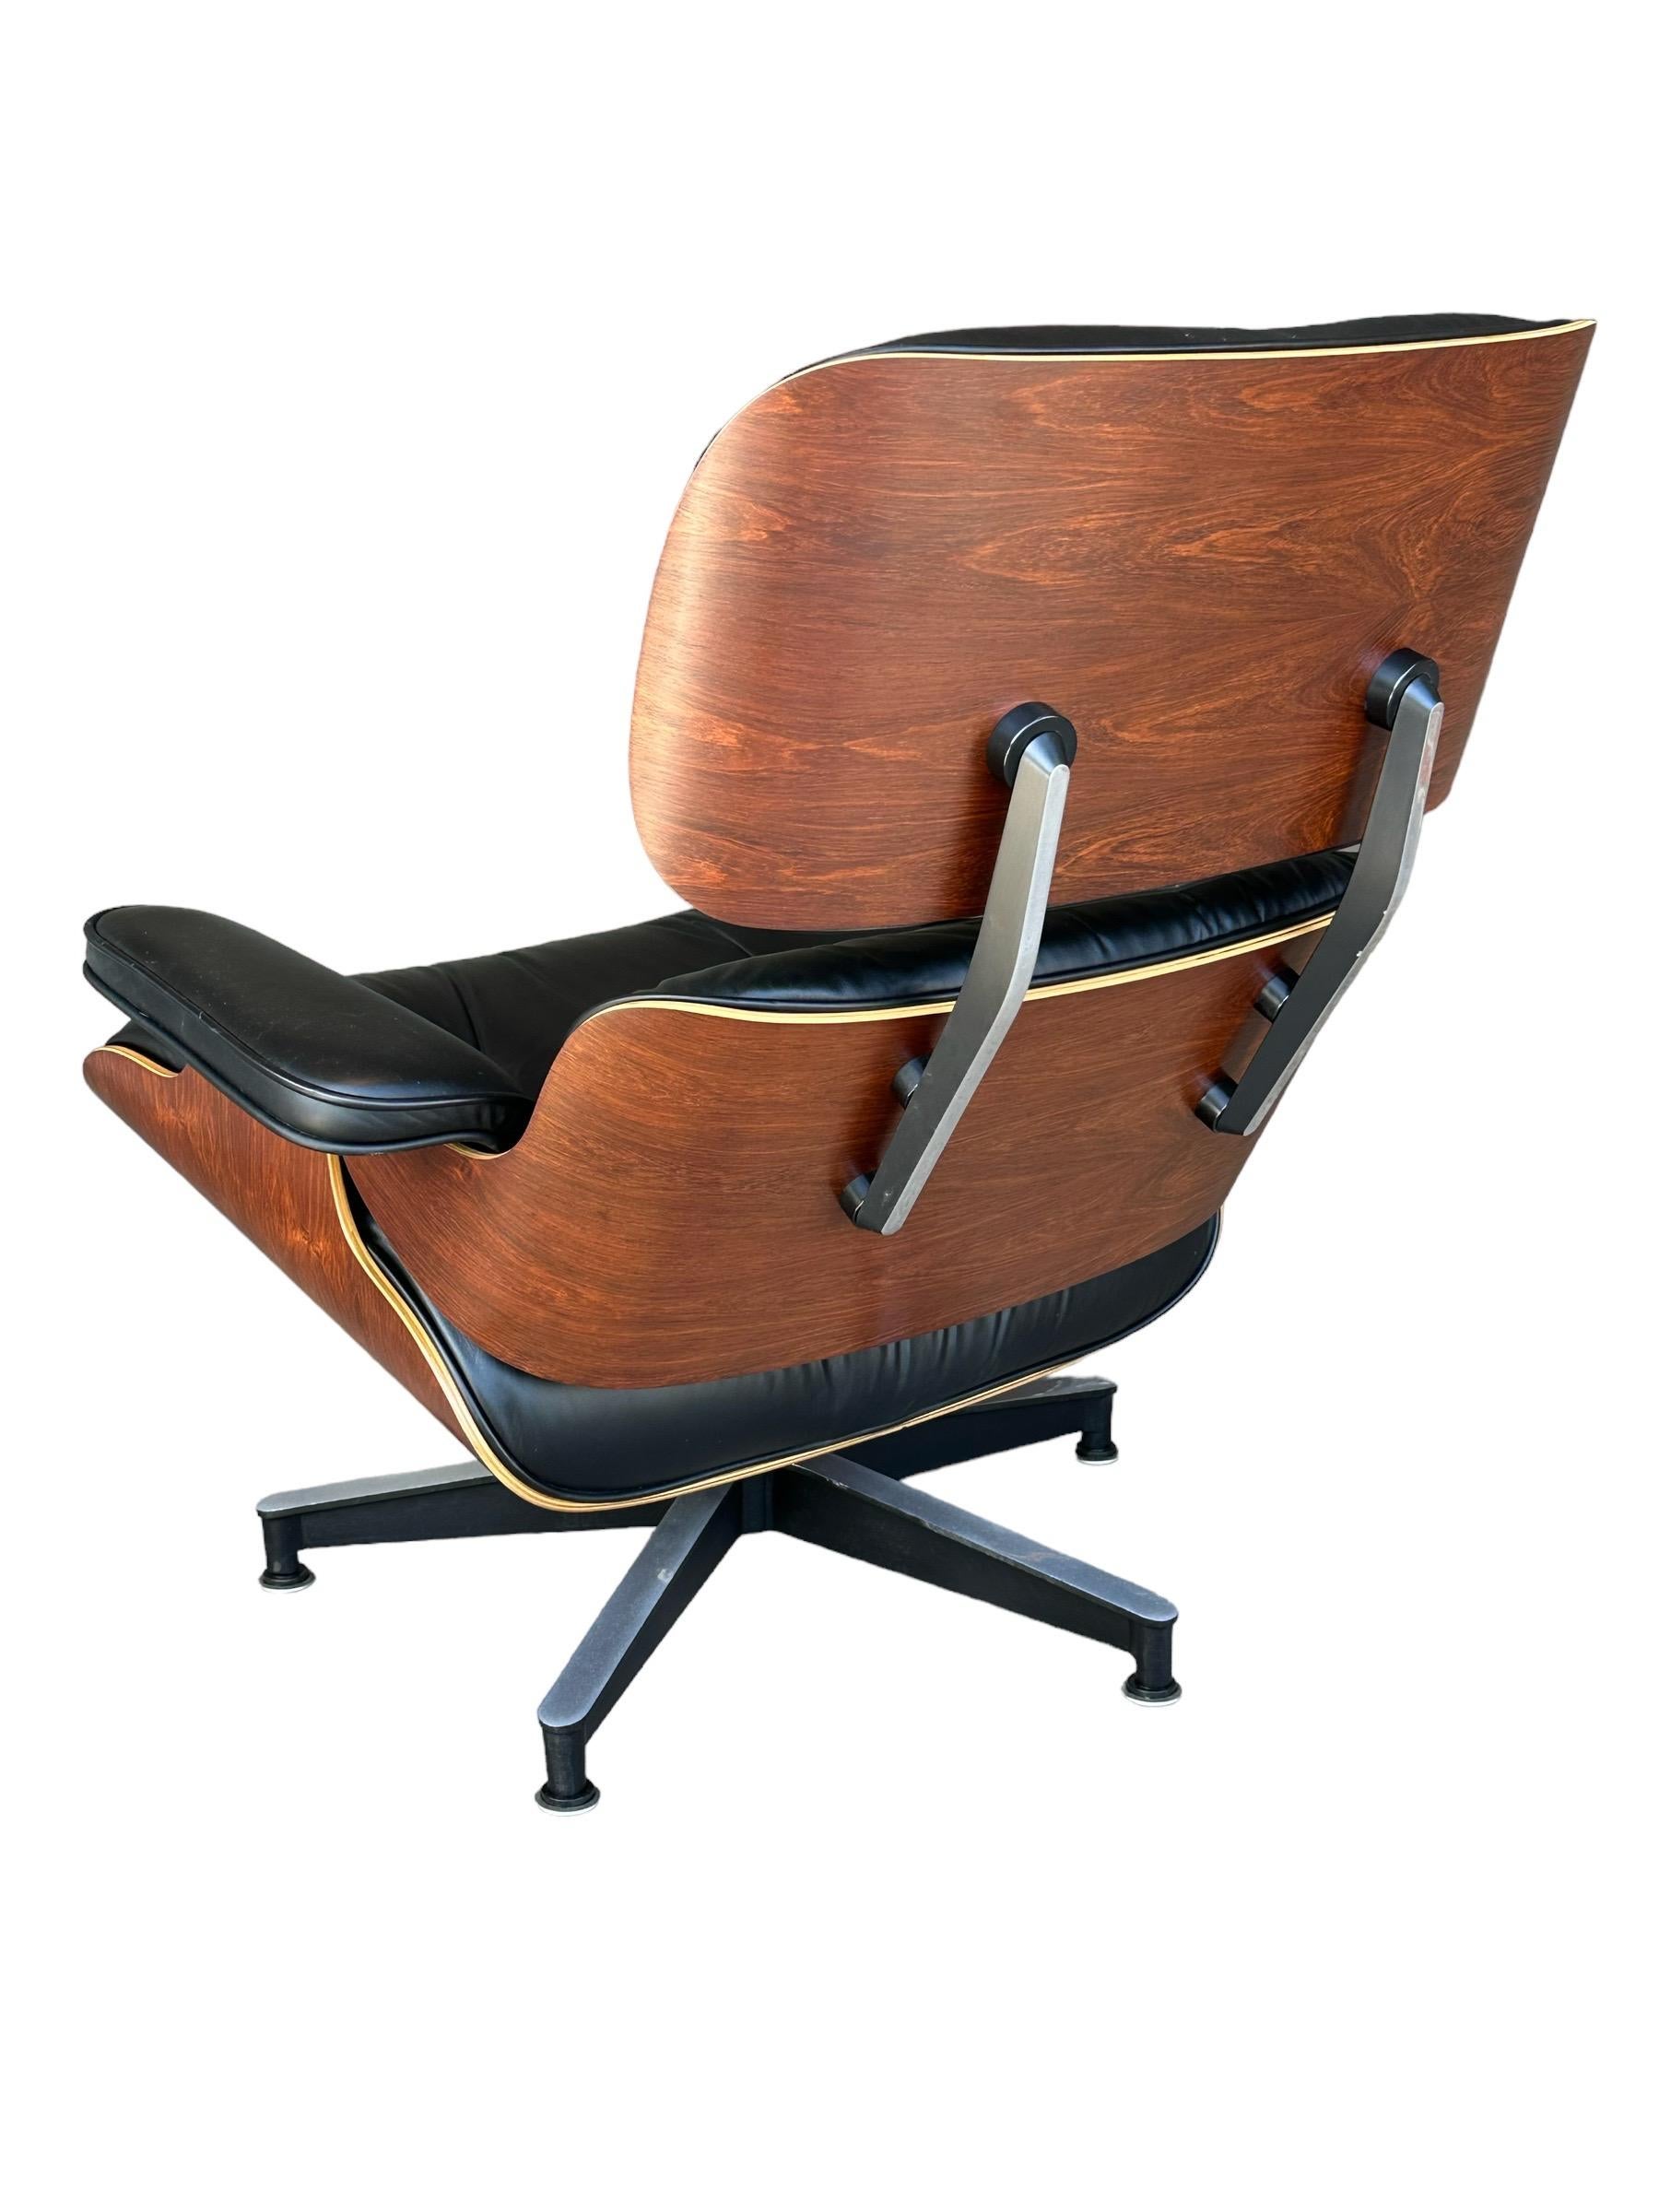 Classic, iconic, beautiful. Does t get better than an Eames lounge chair, unlike newer models which feature less attractive materials this is executed in black leather and refinished Brazilian rosewood shell, which are even in color and feature